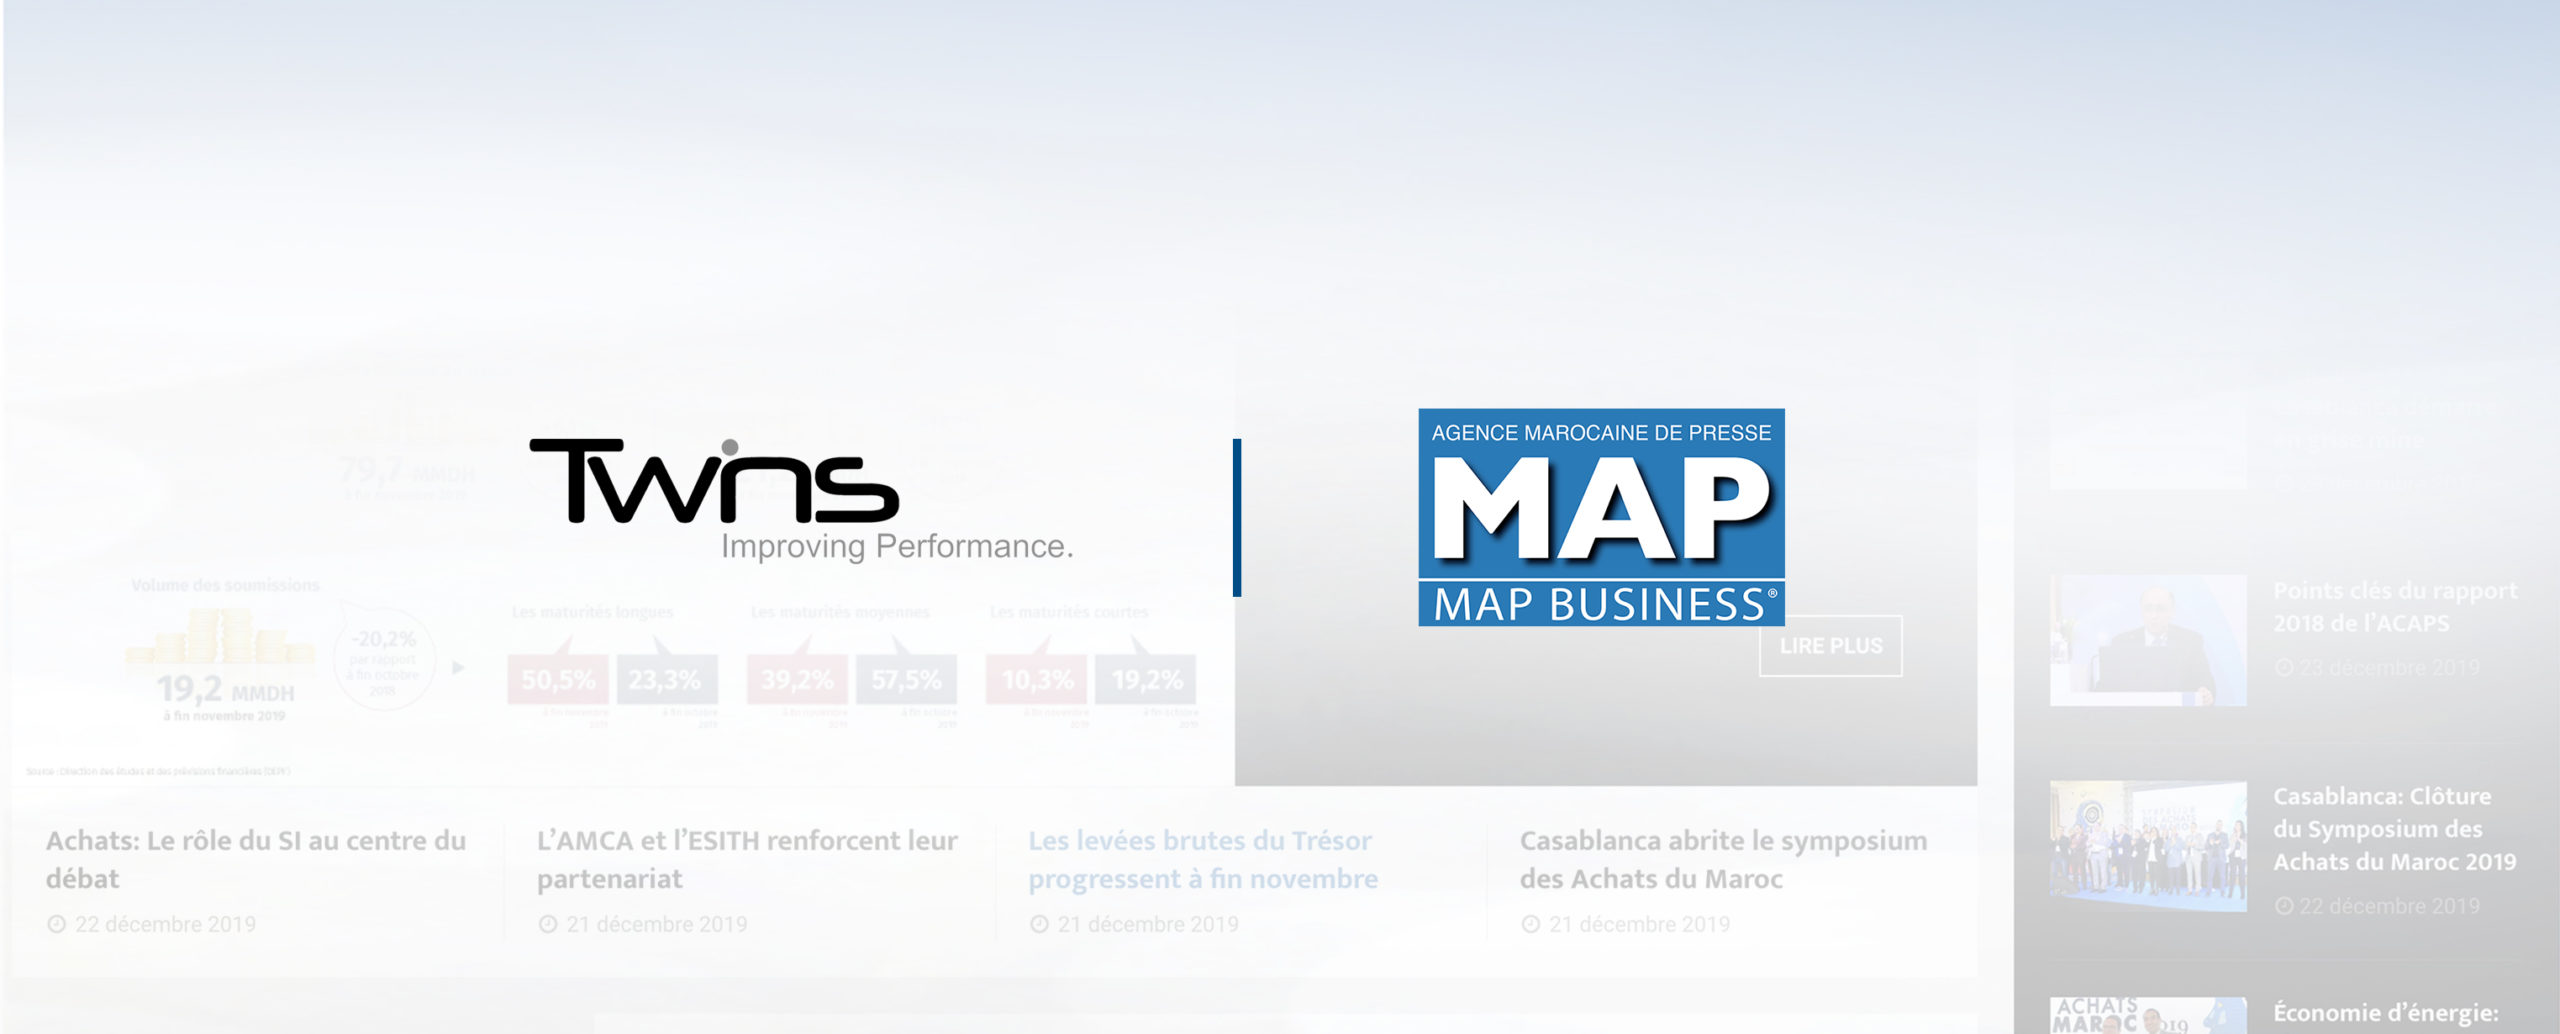 MAP BUSINESS